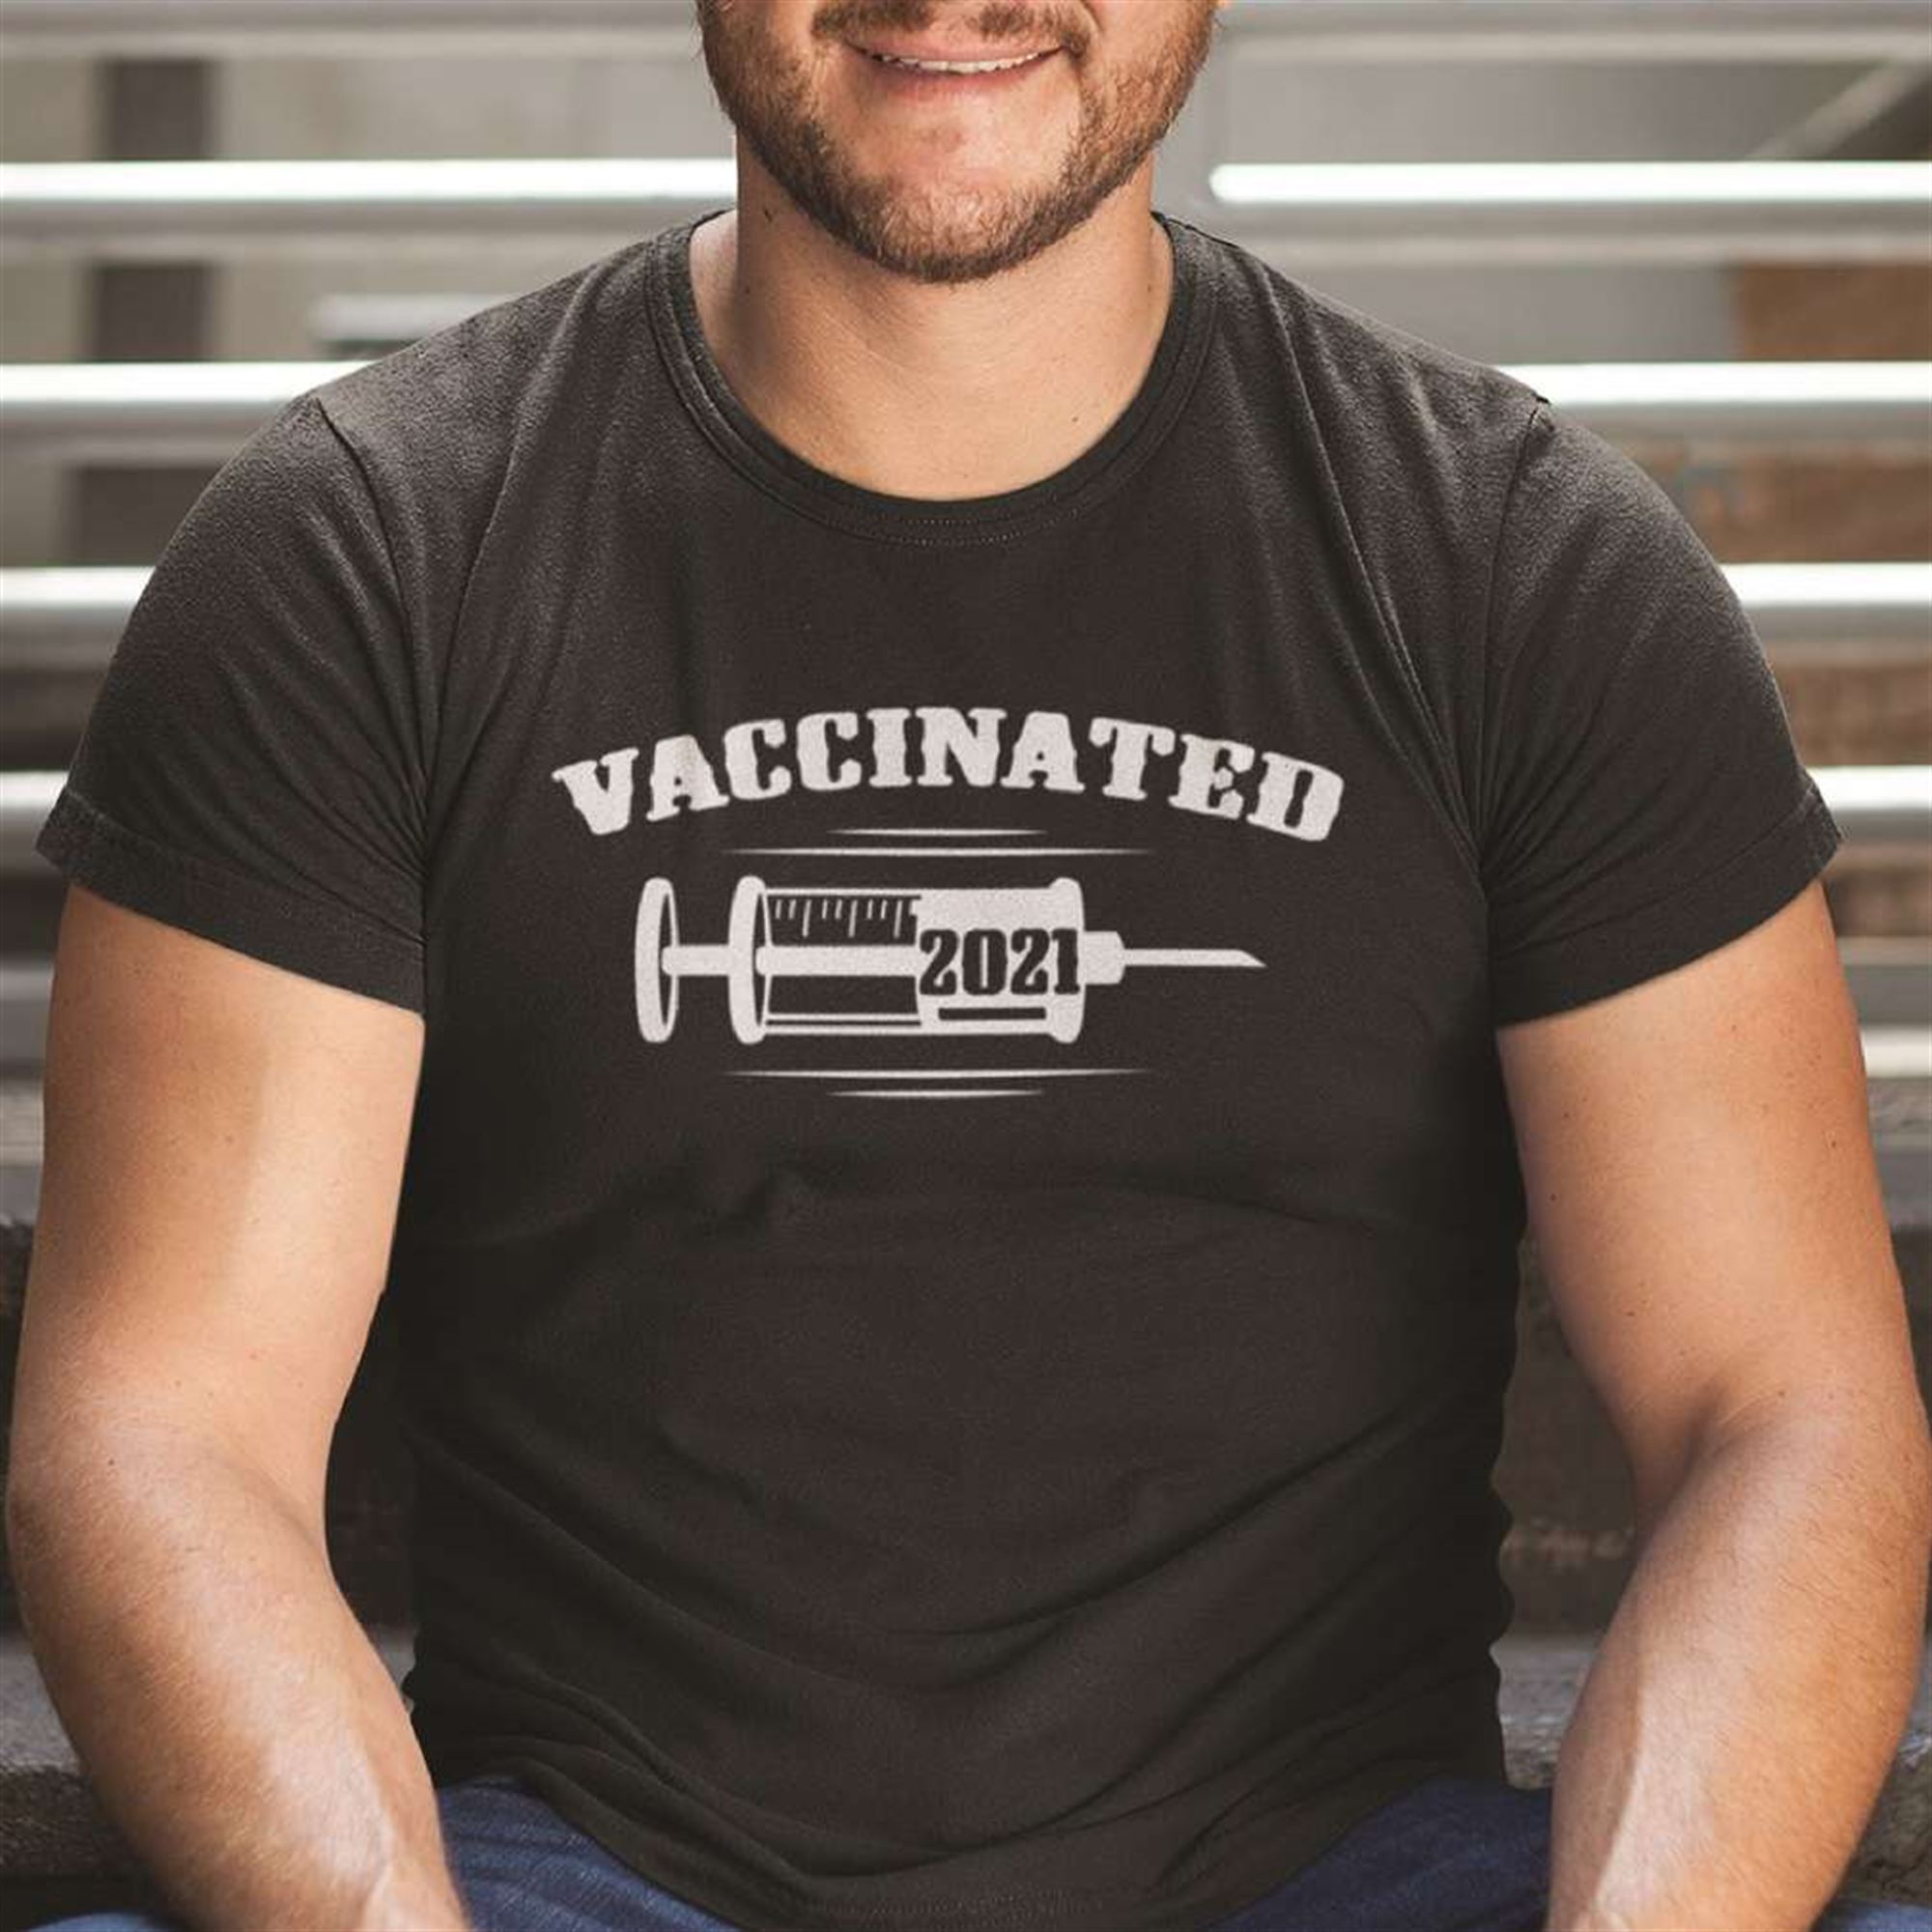 Vaccinated T Shirt Vaccination Day 2021 T-shirt Plus Size Up To 5xl